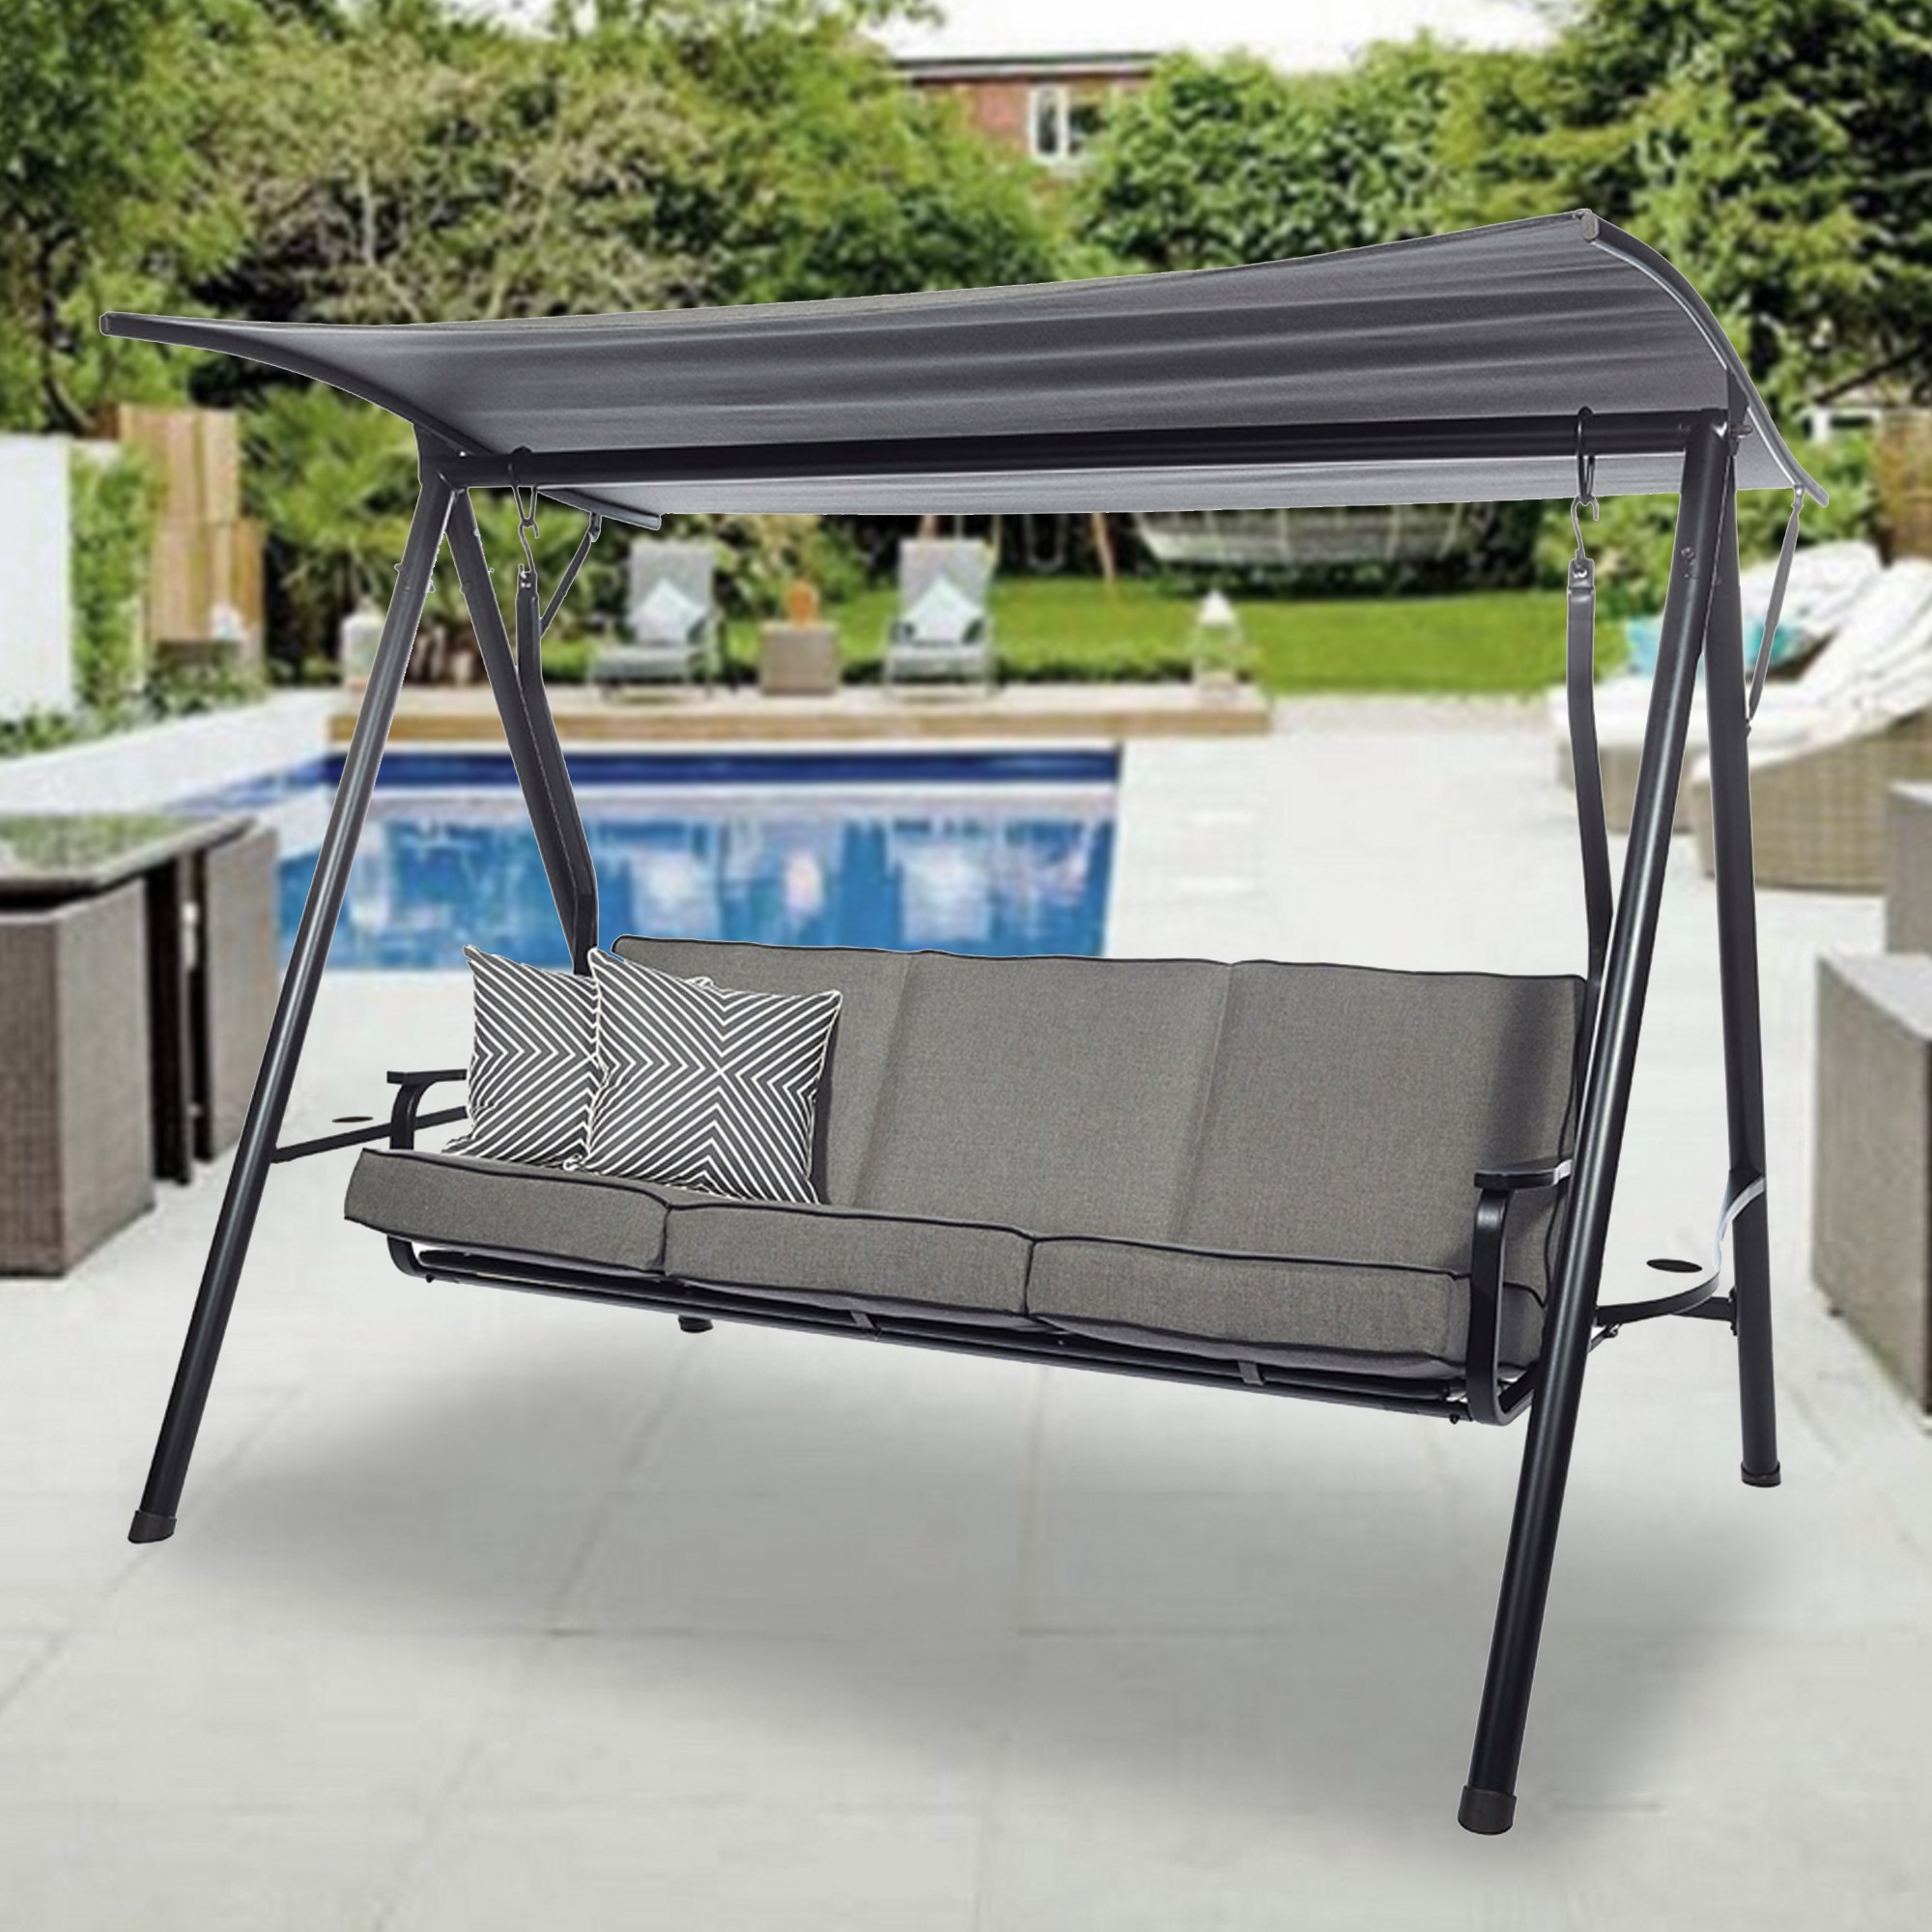 Feian Universal Replacement Swing Canopy,2pcs/Set Waterproof Sunproof Canopy Patio Swing Seat Cover for 3 Seater Solid 